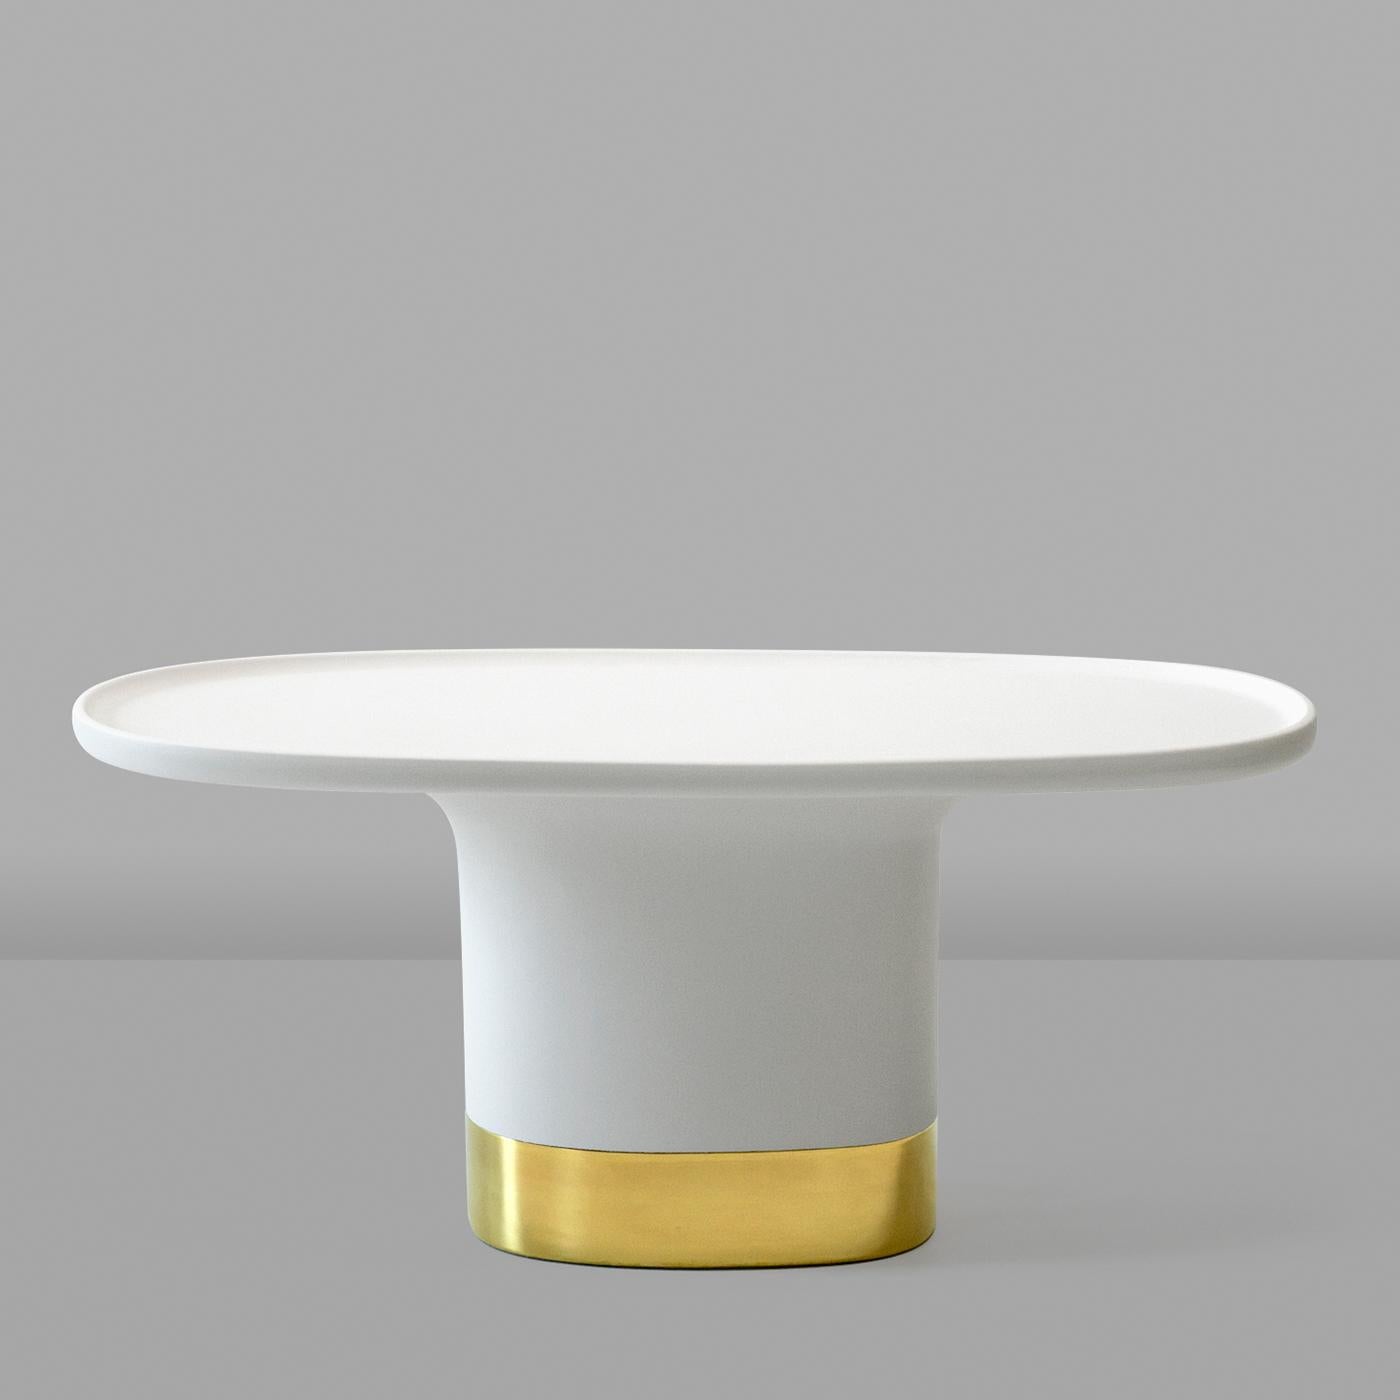 This coffee table makes for a striking pedestal for display beside a sofa or armchair in both residential and commercial interiors. Designed by Matteo Zorzenoni, Sune is crafted entirely of ceramic with a crisp white glossy finish that enhances its